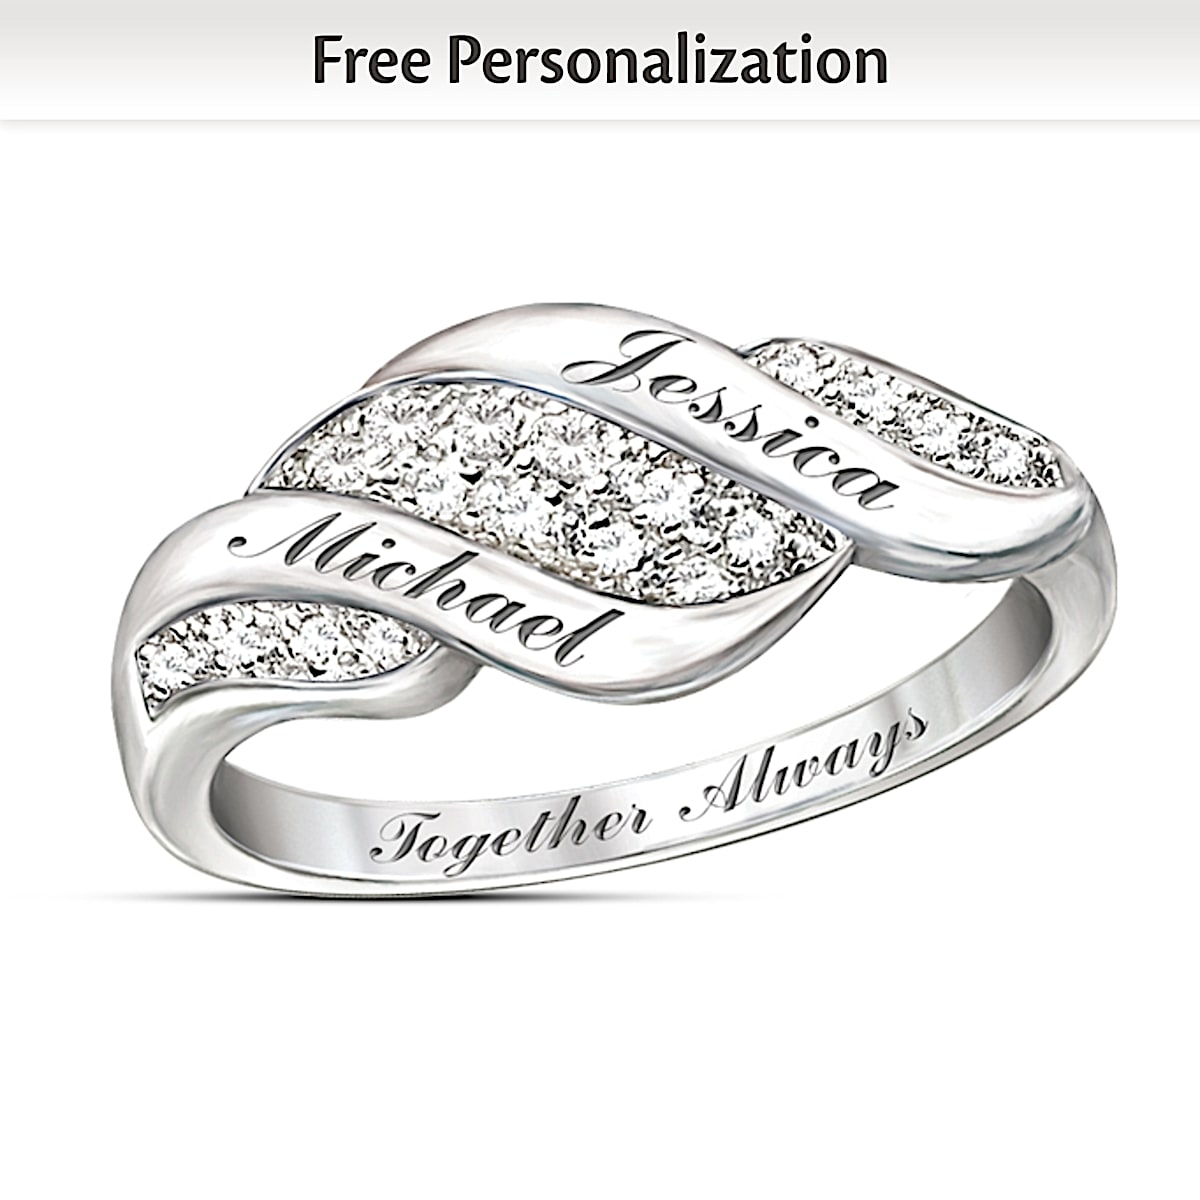 Personalized Engraved Rings - My Name Necklace Canada